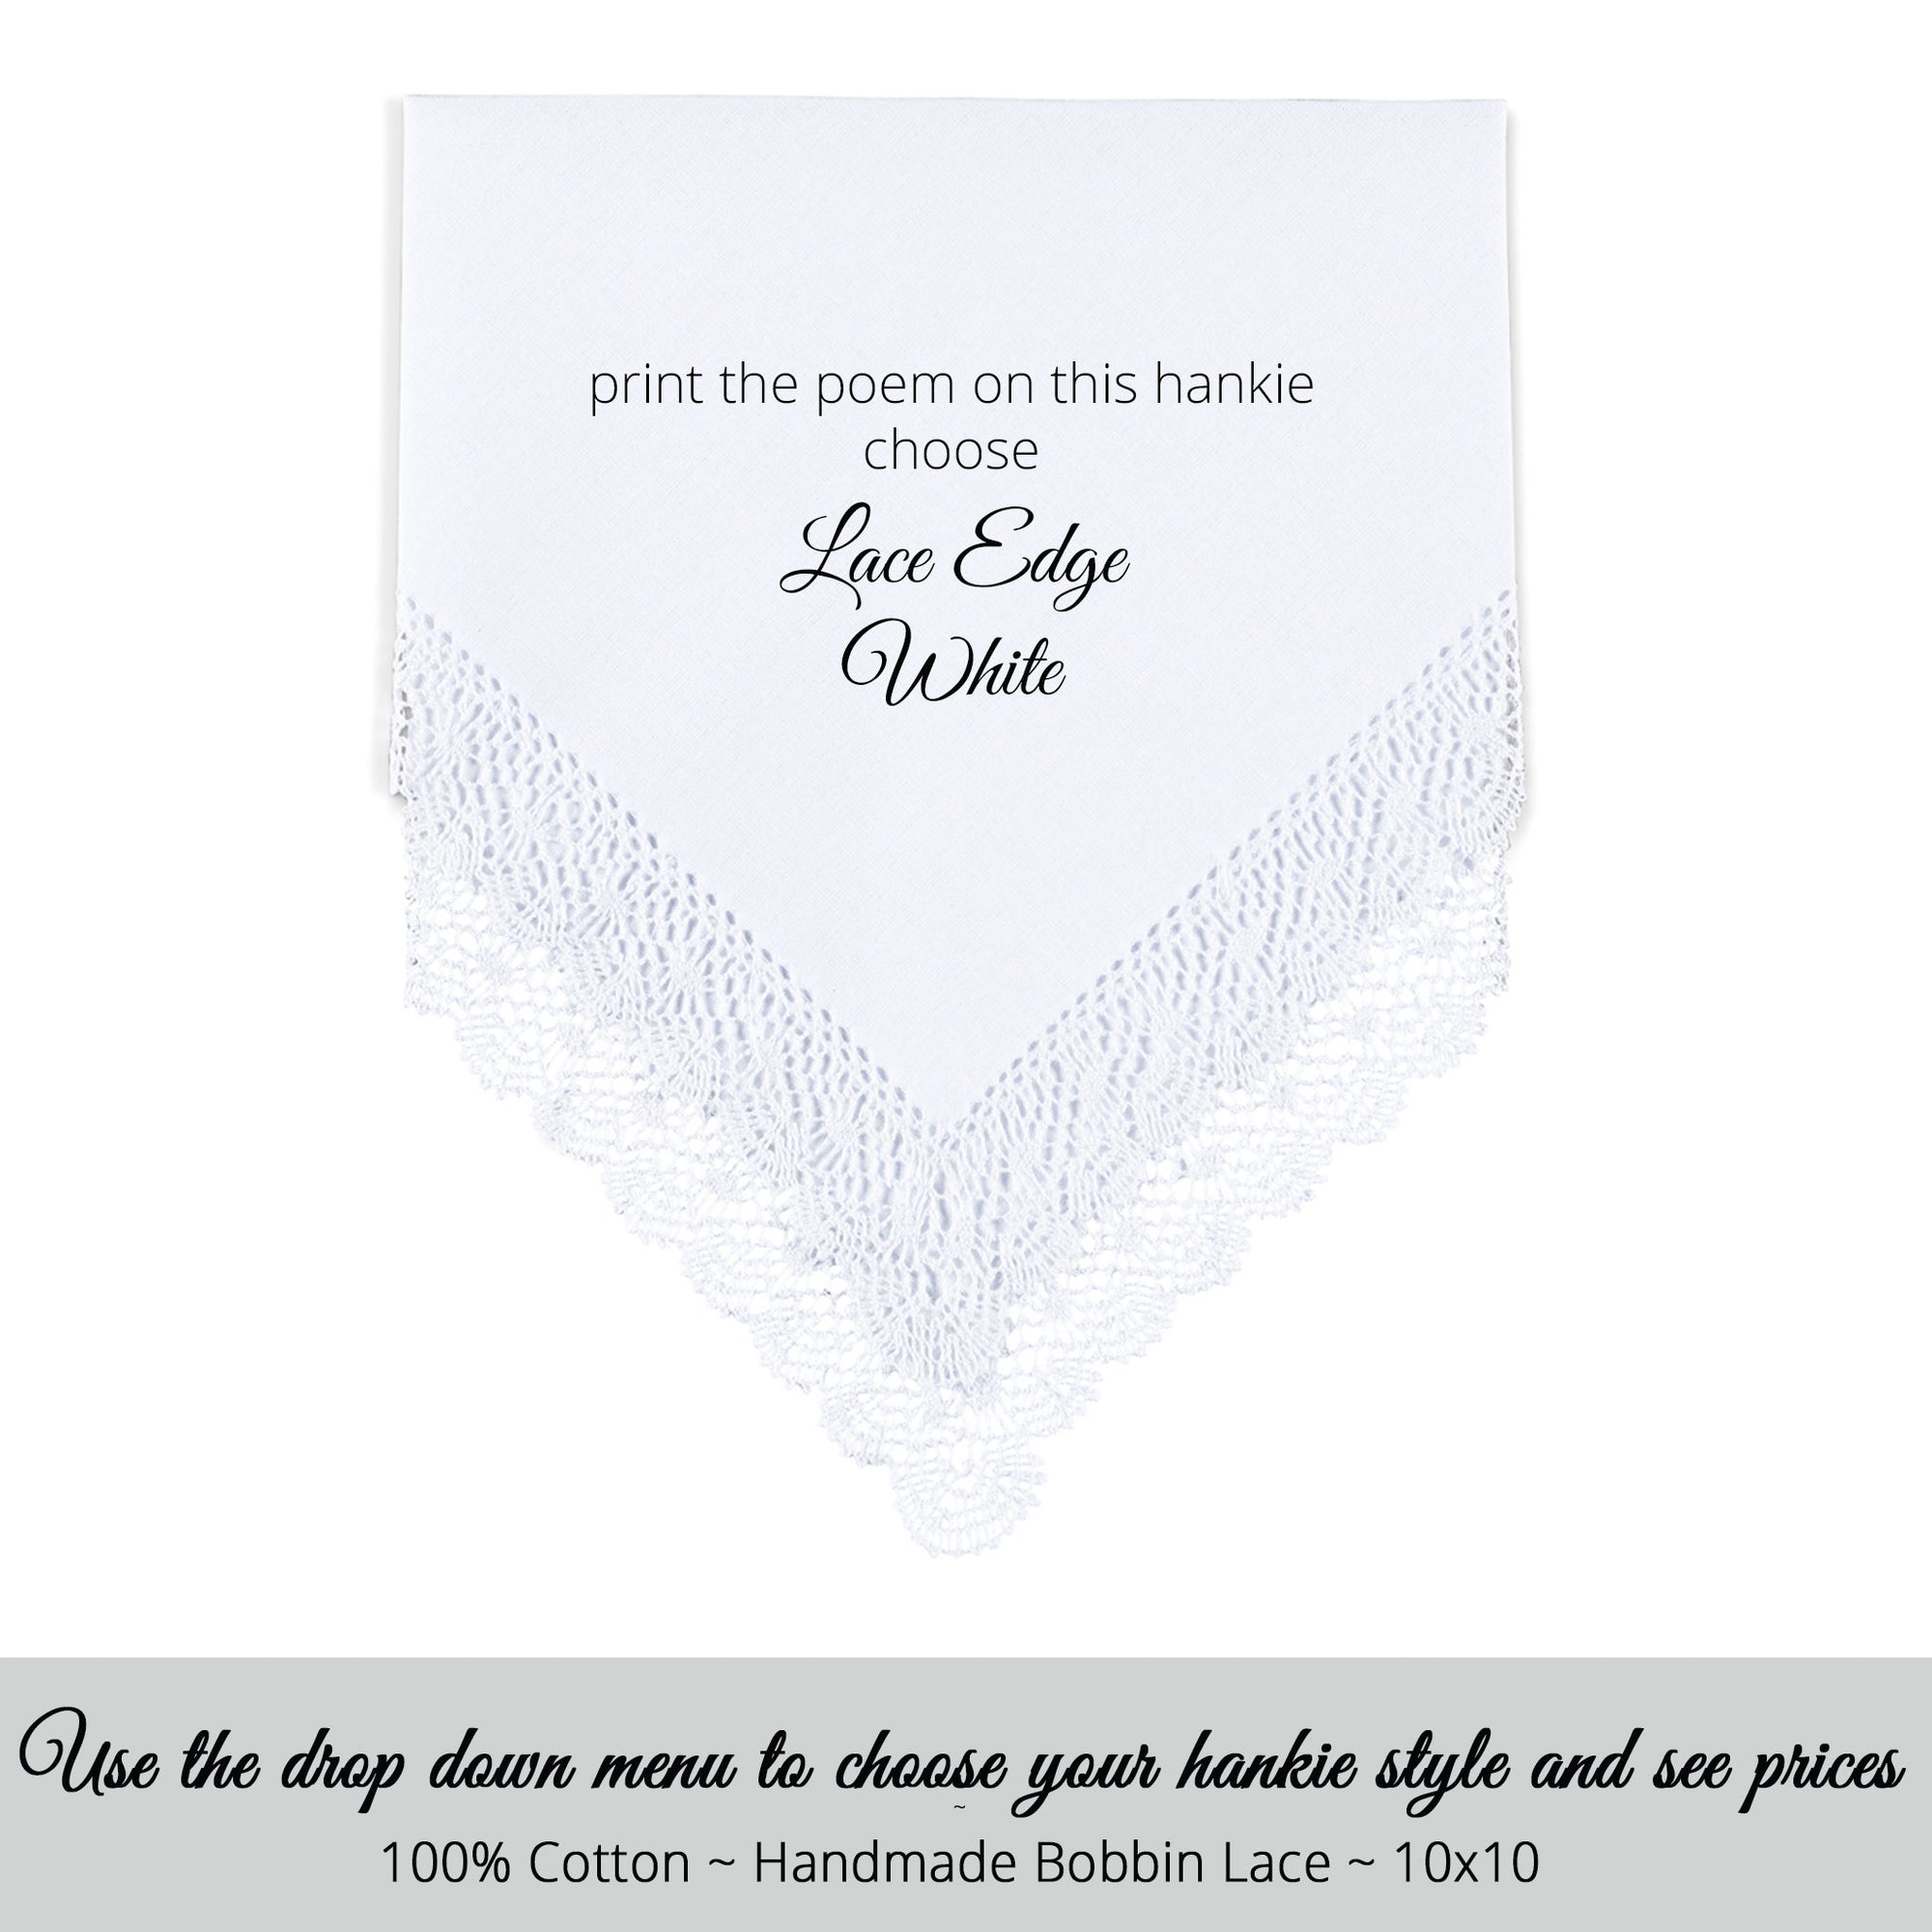 Wedding Handkerchief white with bobbin lace poem printed hankie for the bridesmaid